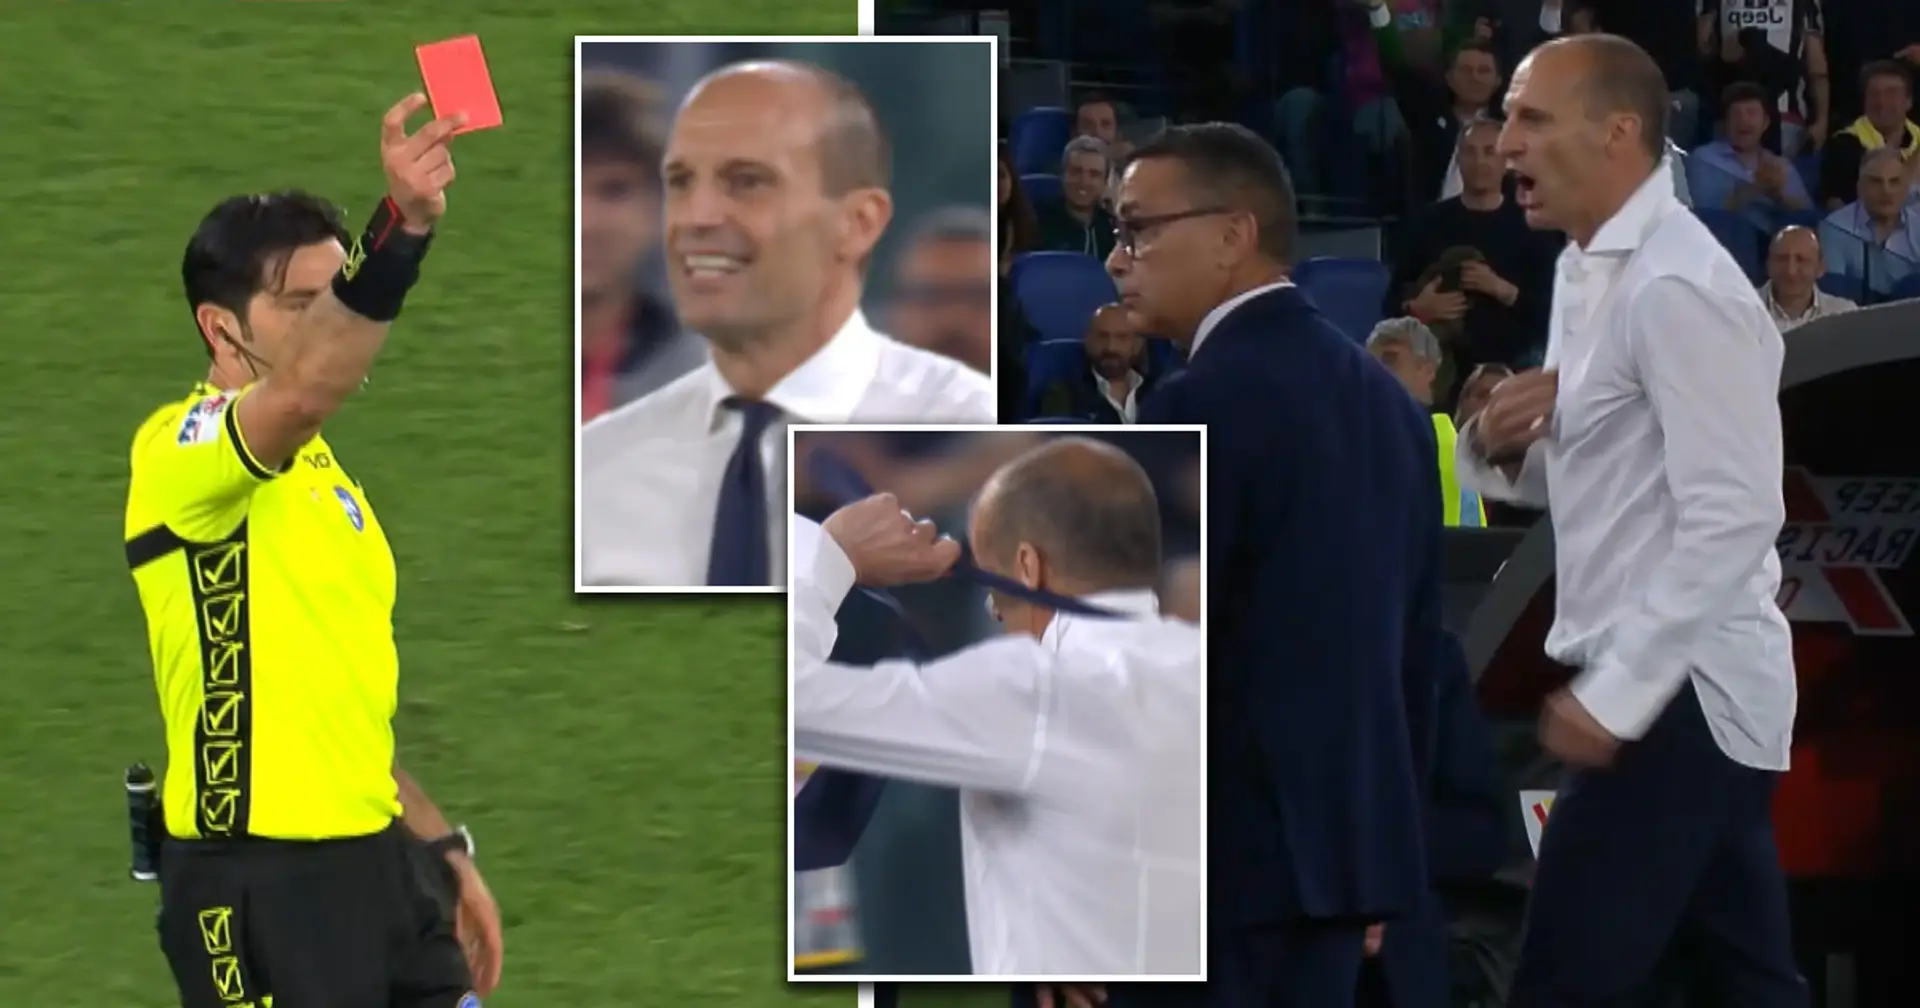 Massimiliano Allegri aggressively strips off after receiving a red card 